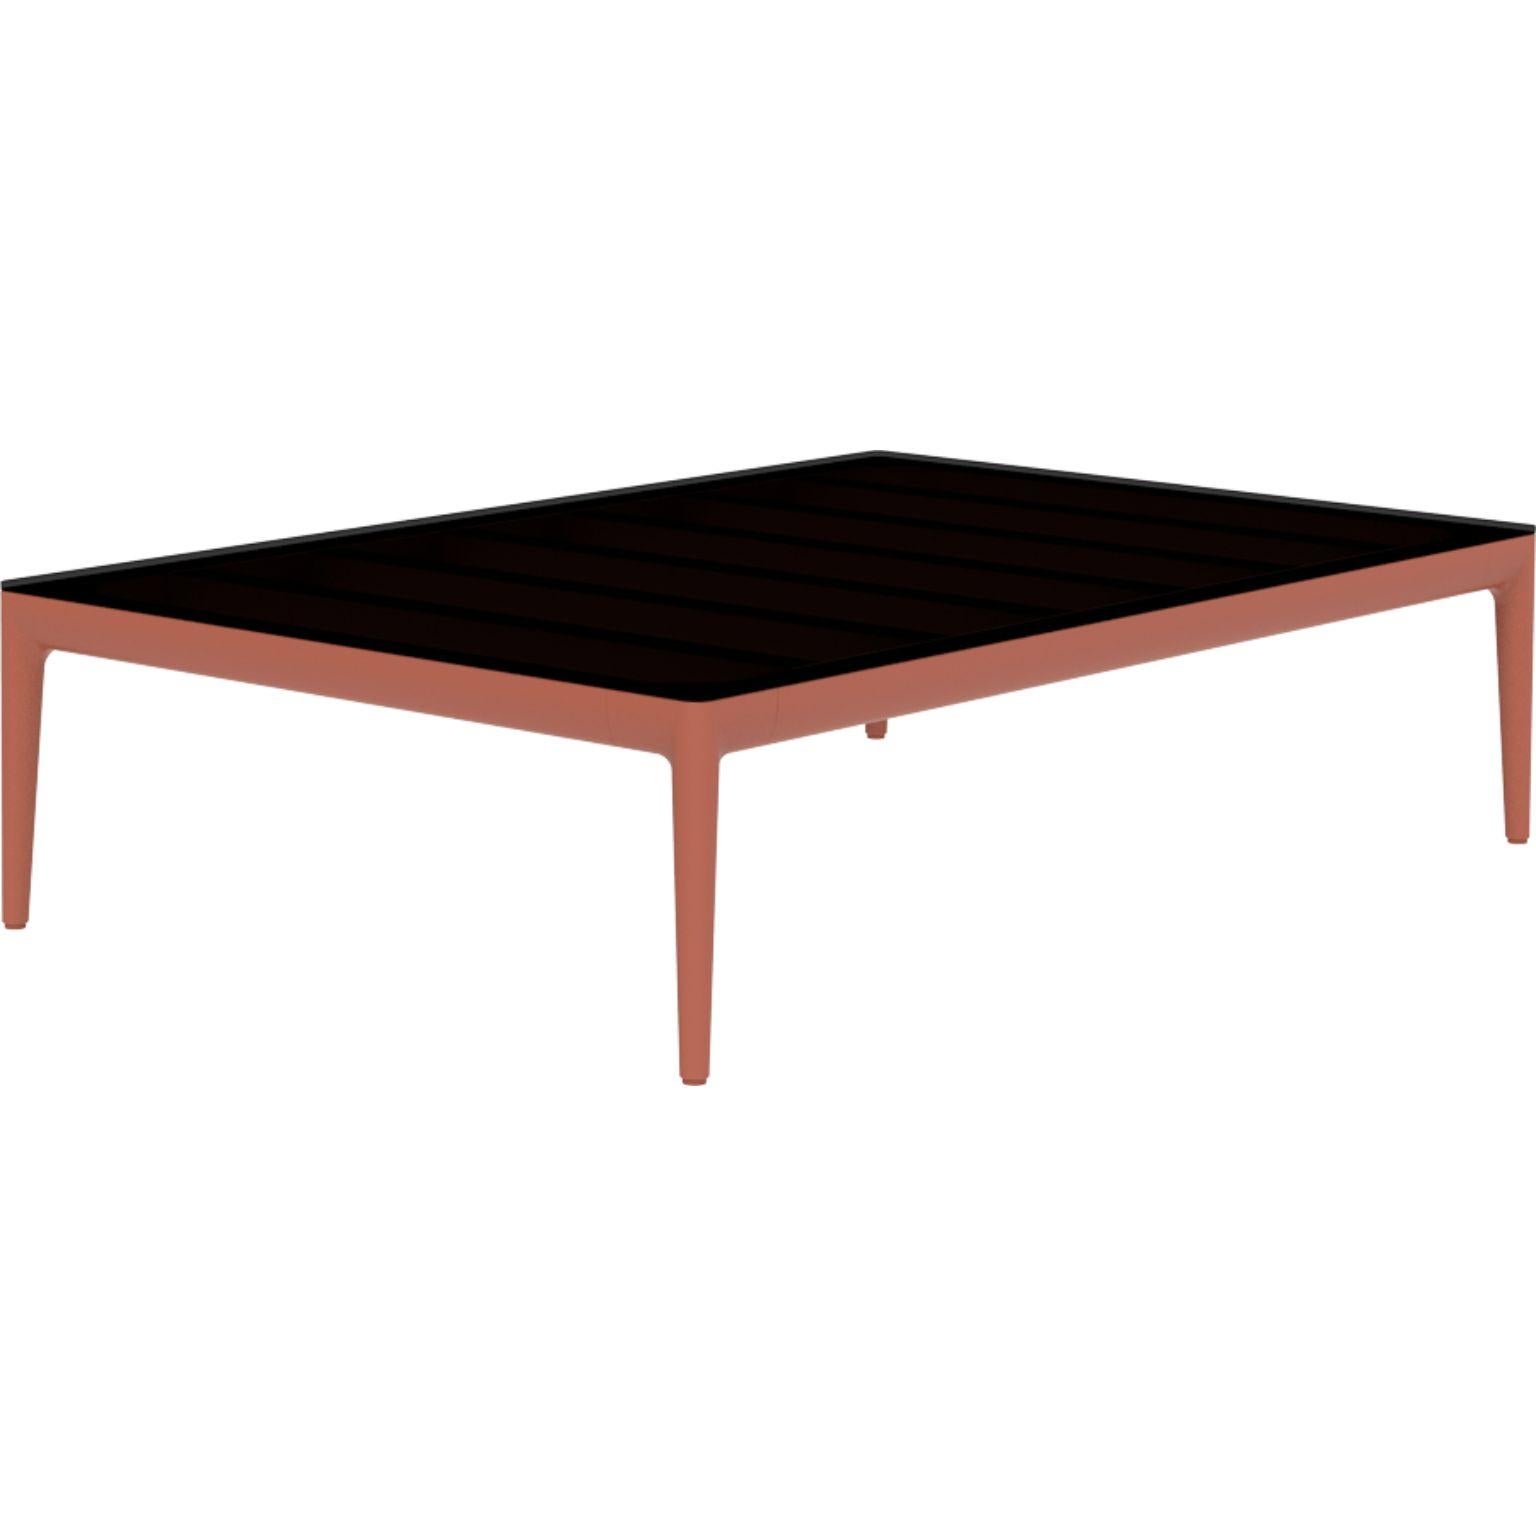 Ribbons Salmon 115 coffee table by MOWEE
Dimensions: D76 x W115 x H29 cm
Material: Aluminum and HPL top.
Weight: 14.5 kg.
Also available in different colors and finishes. (HPL Black Edge or Neolith top). 

An unmistakable collection for its